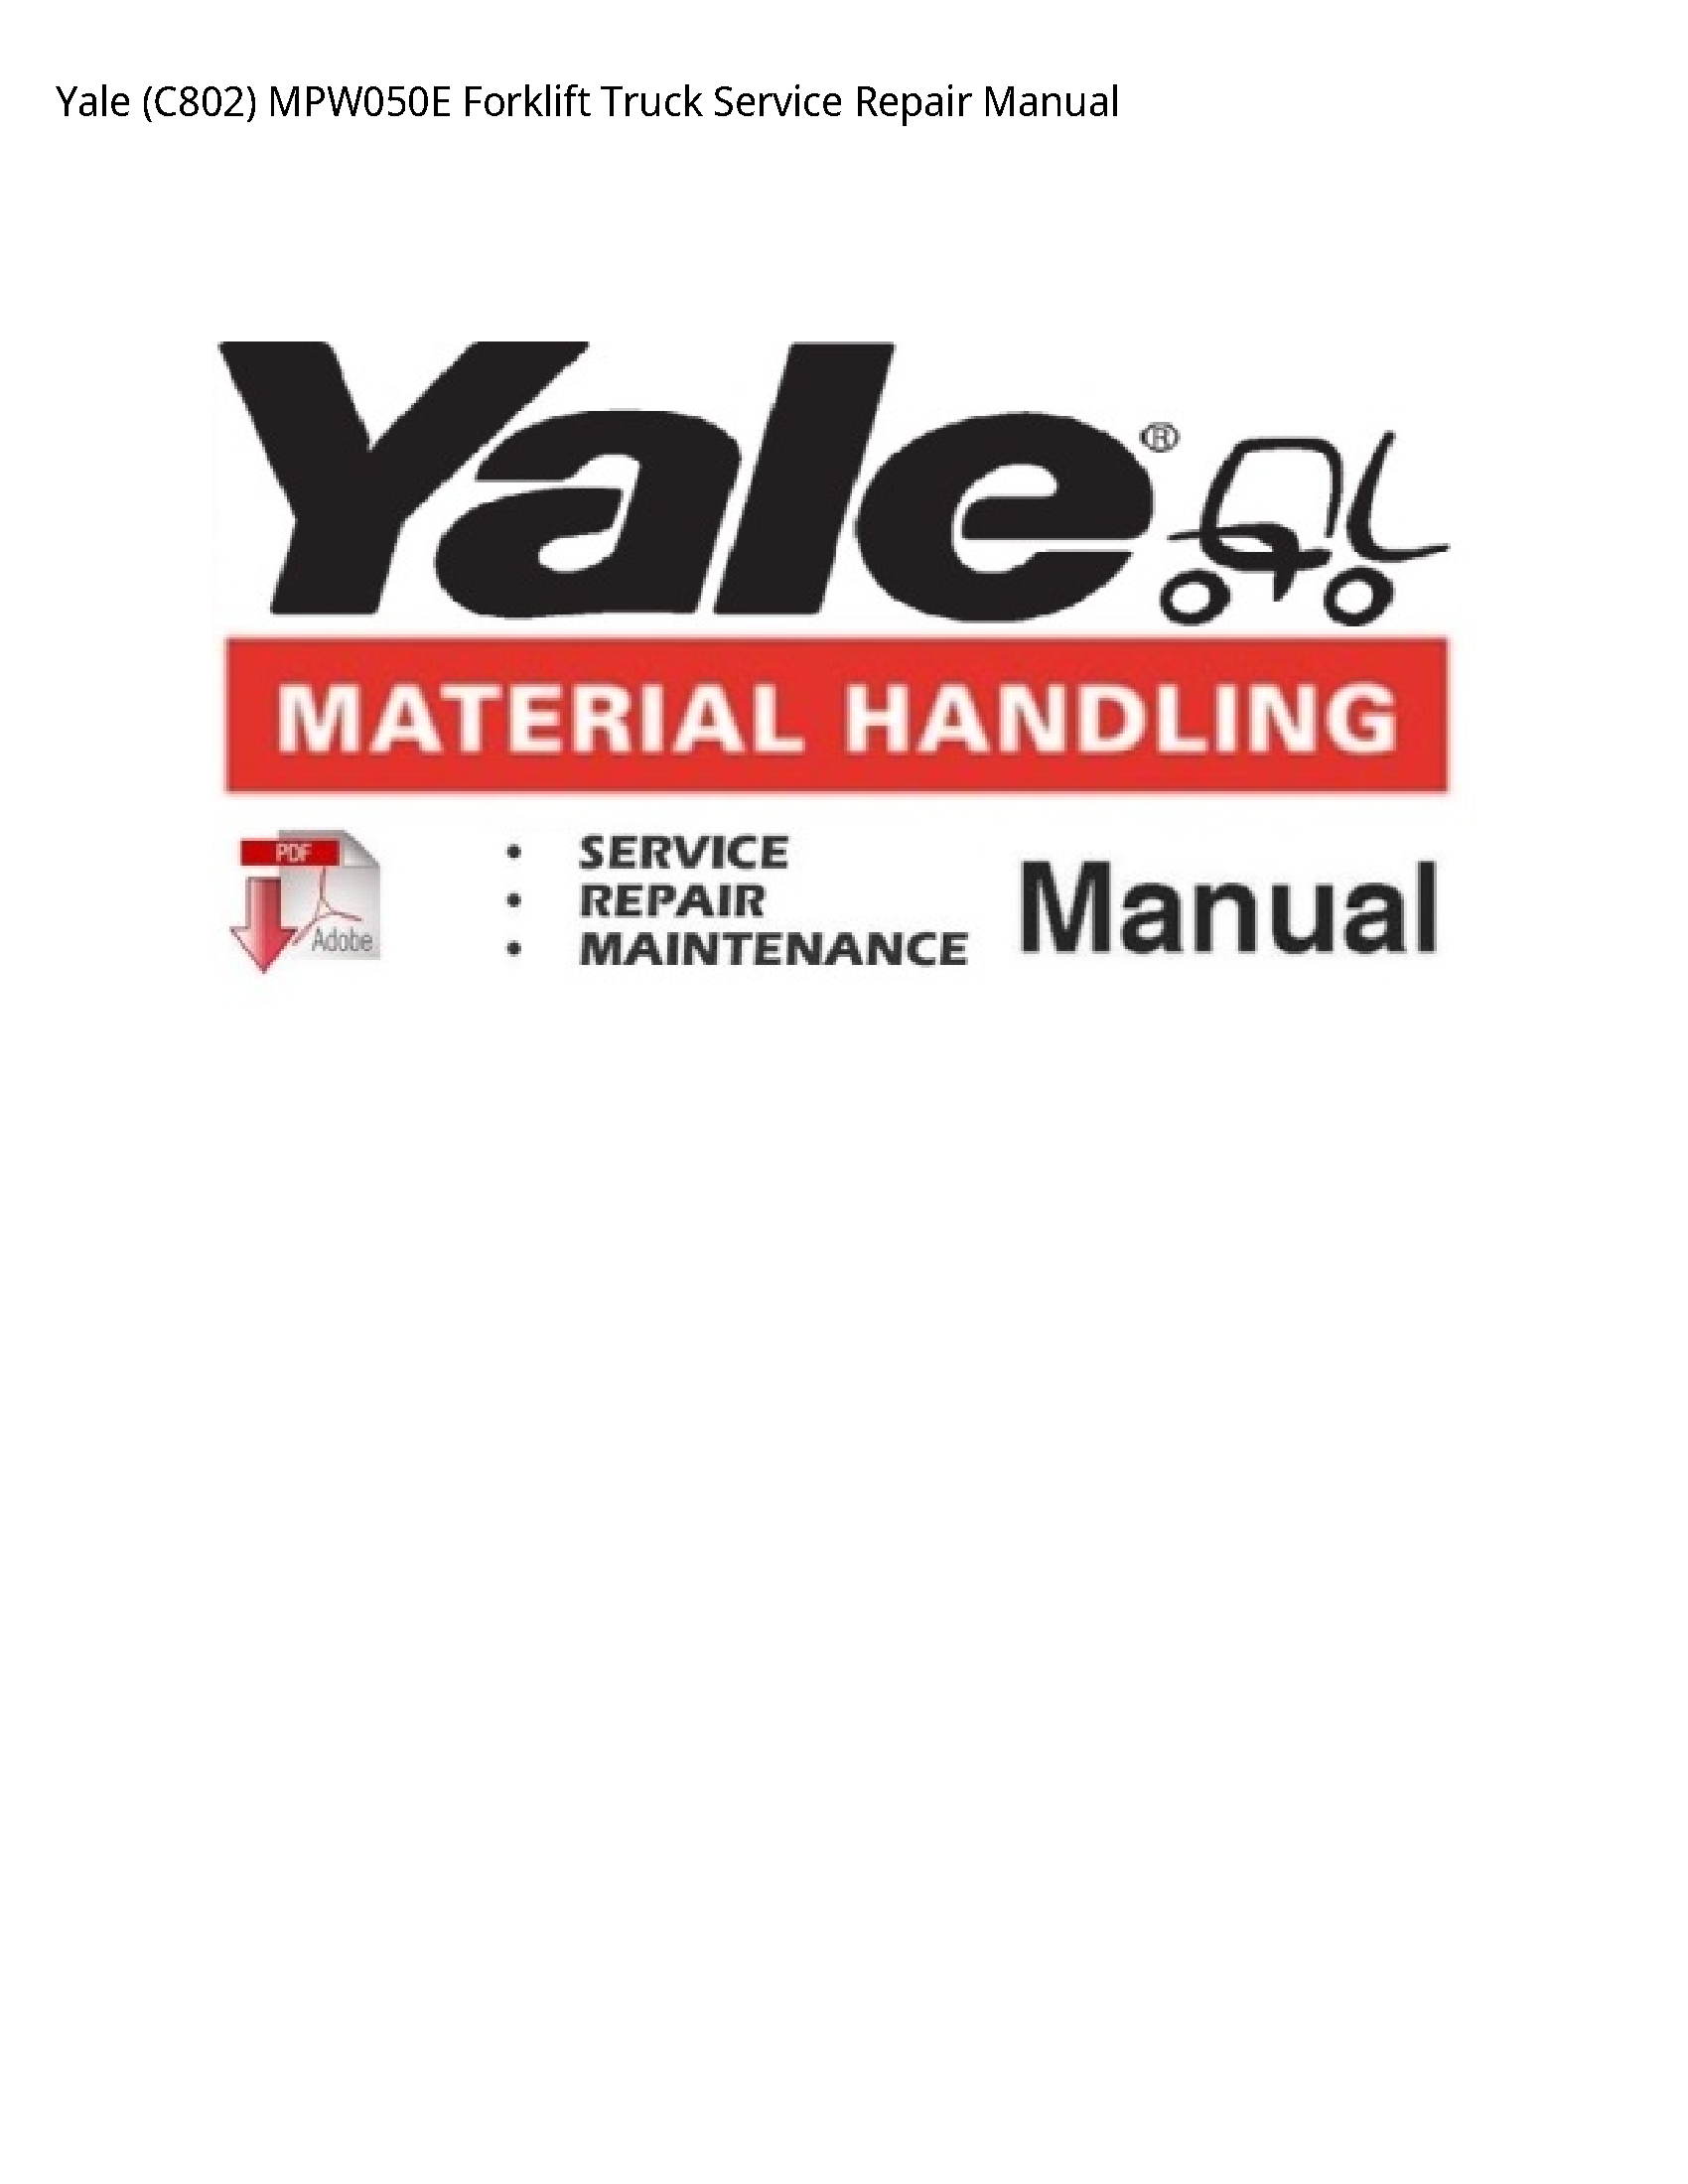 Yale (C802) Forklift Truck manual